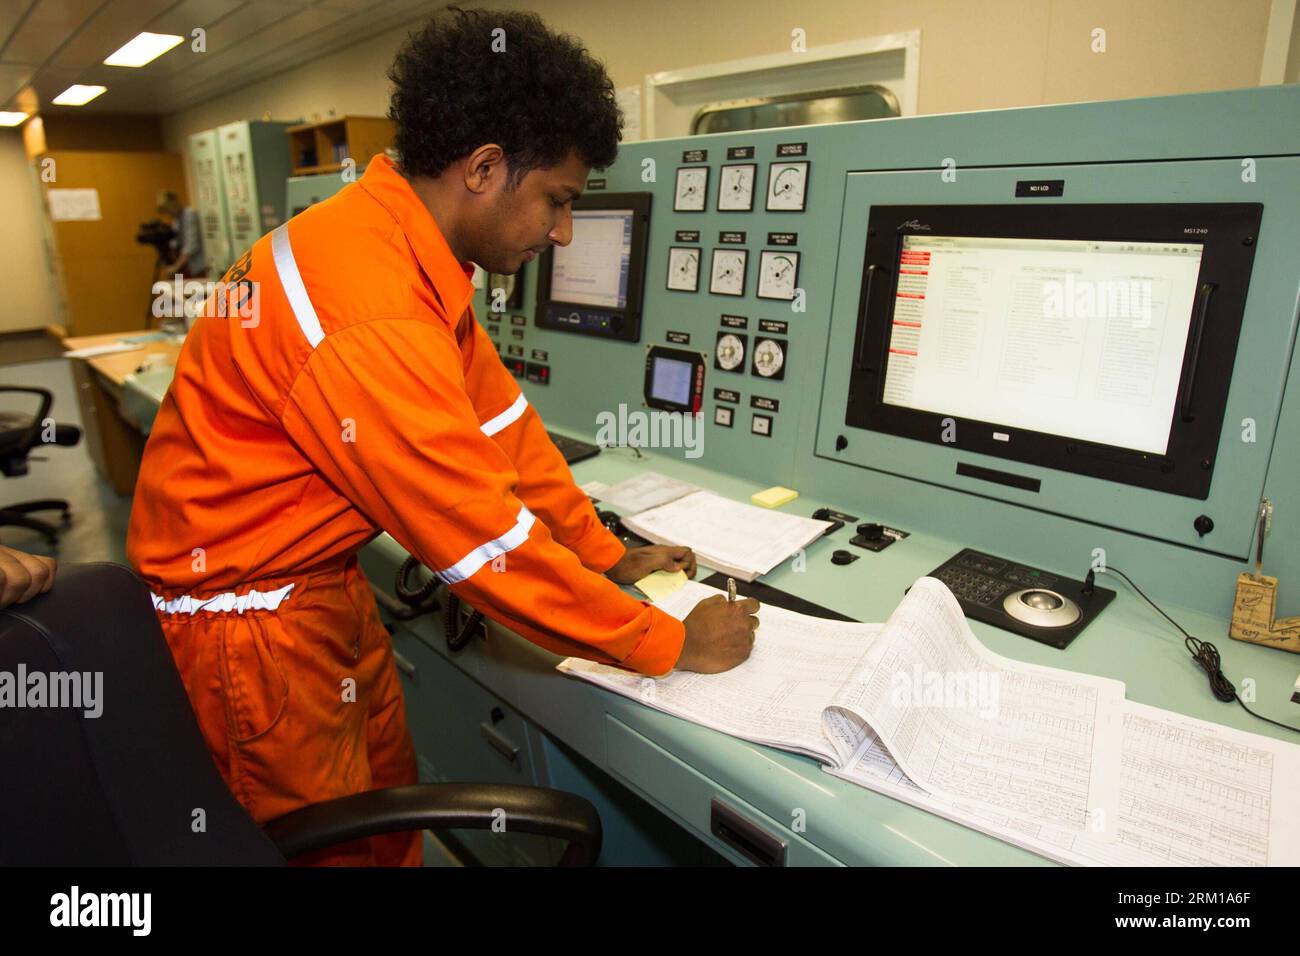 Bildnummer: 59544796  Datum: 20.04.2013  Copyright: imago/Xinhua (130420) -- ROTTERDAM, April 20, 2013(Xinhua) -- A member of staff works at the freighter Pride at port of Rotterdam, the Netherlands, April 20, 2013. The freighter Pride of COSCO Group, which ranked first of the Environmental Ship Index (ESI) published by port of Rotterdam, the biggest European port, was awarded as the most sustainable ship of 2012 in Rotterdam on Saturday. (Xinhua/Jia Lirui)(zhf) NETHERLANDS-ROTTERDAM-COSCO SHIP-AWARD PUBLICATIONxNOTxINxCHN Wirtschaft Schiff Frachter Frachtschiff Ehrung Nachhaltigkeit premiumd Stock Photo